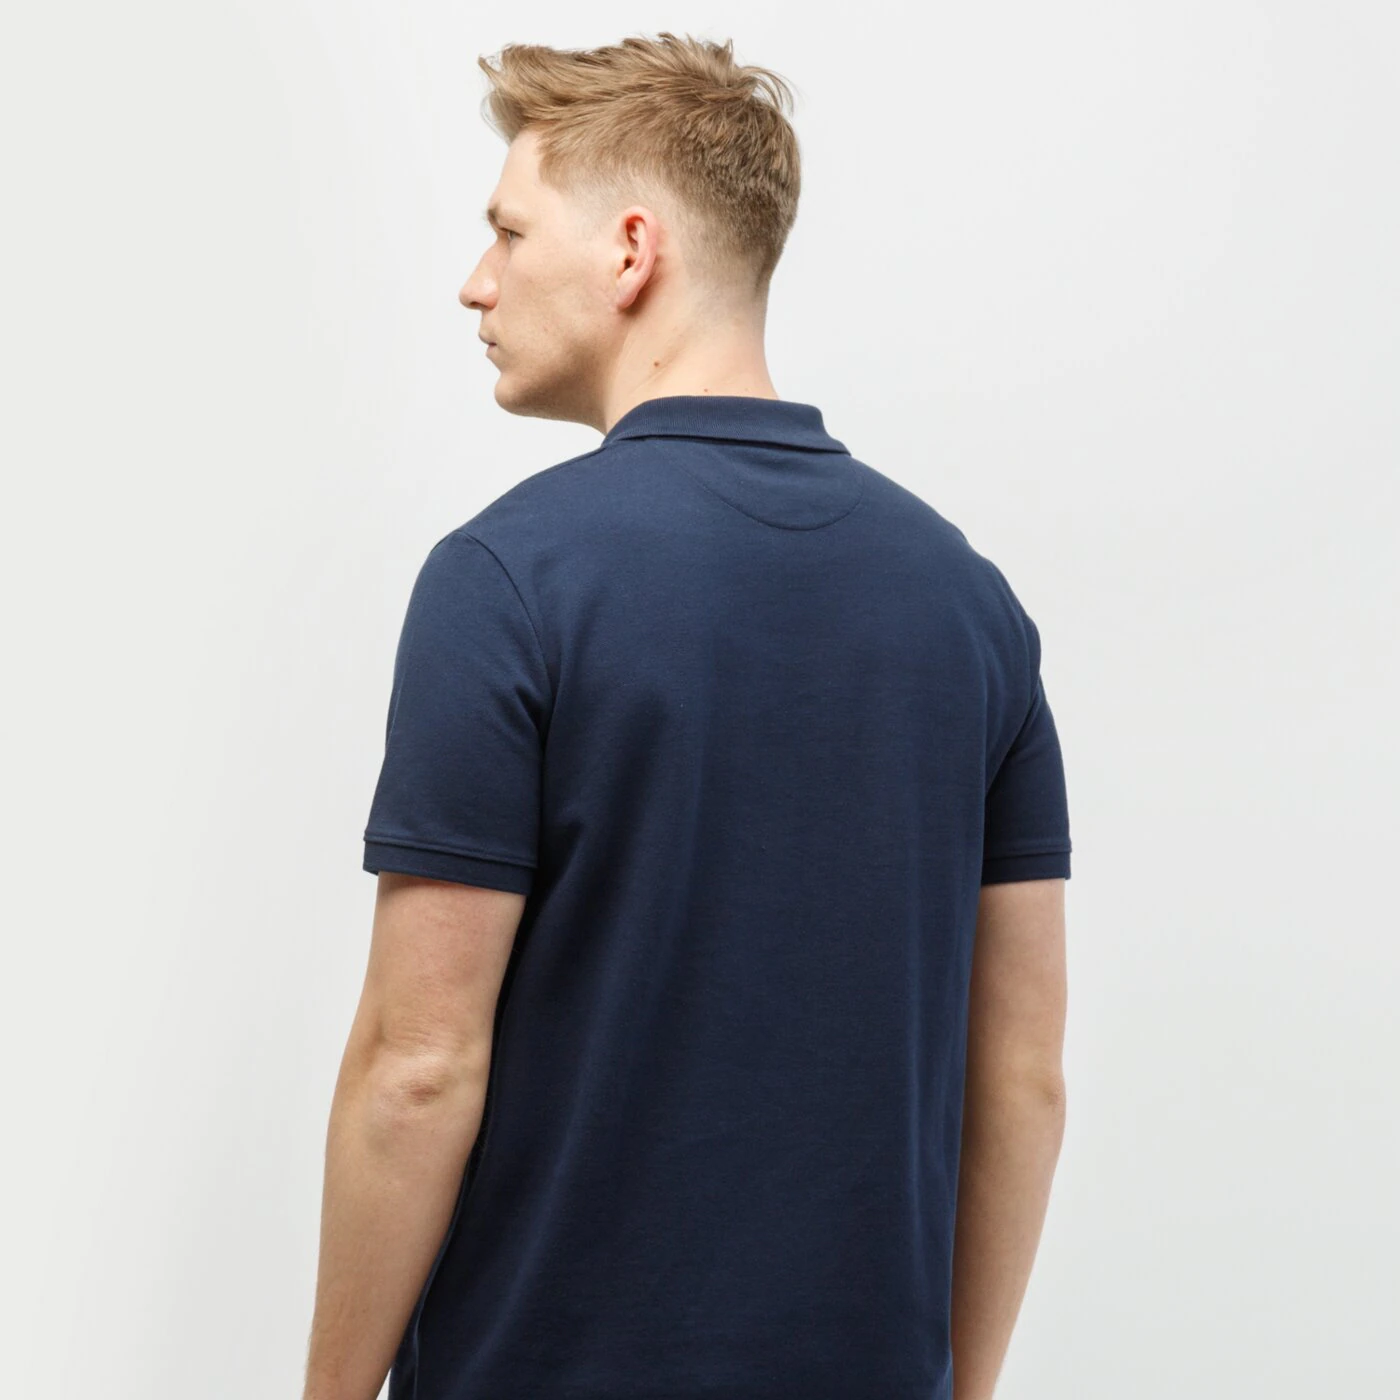 TIMBERLAND POLO SS MILLERS RIVER PIQUE POLO REGULAR